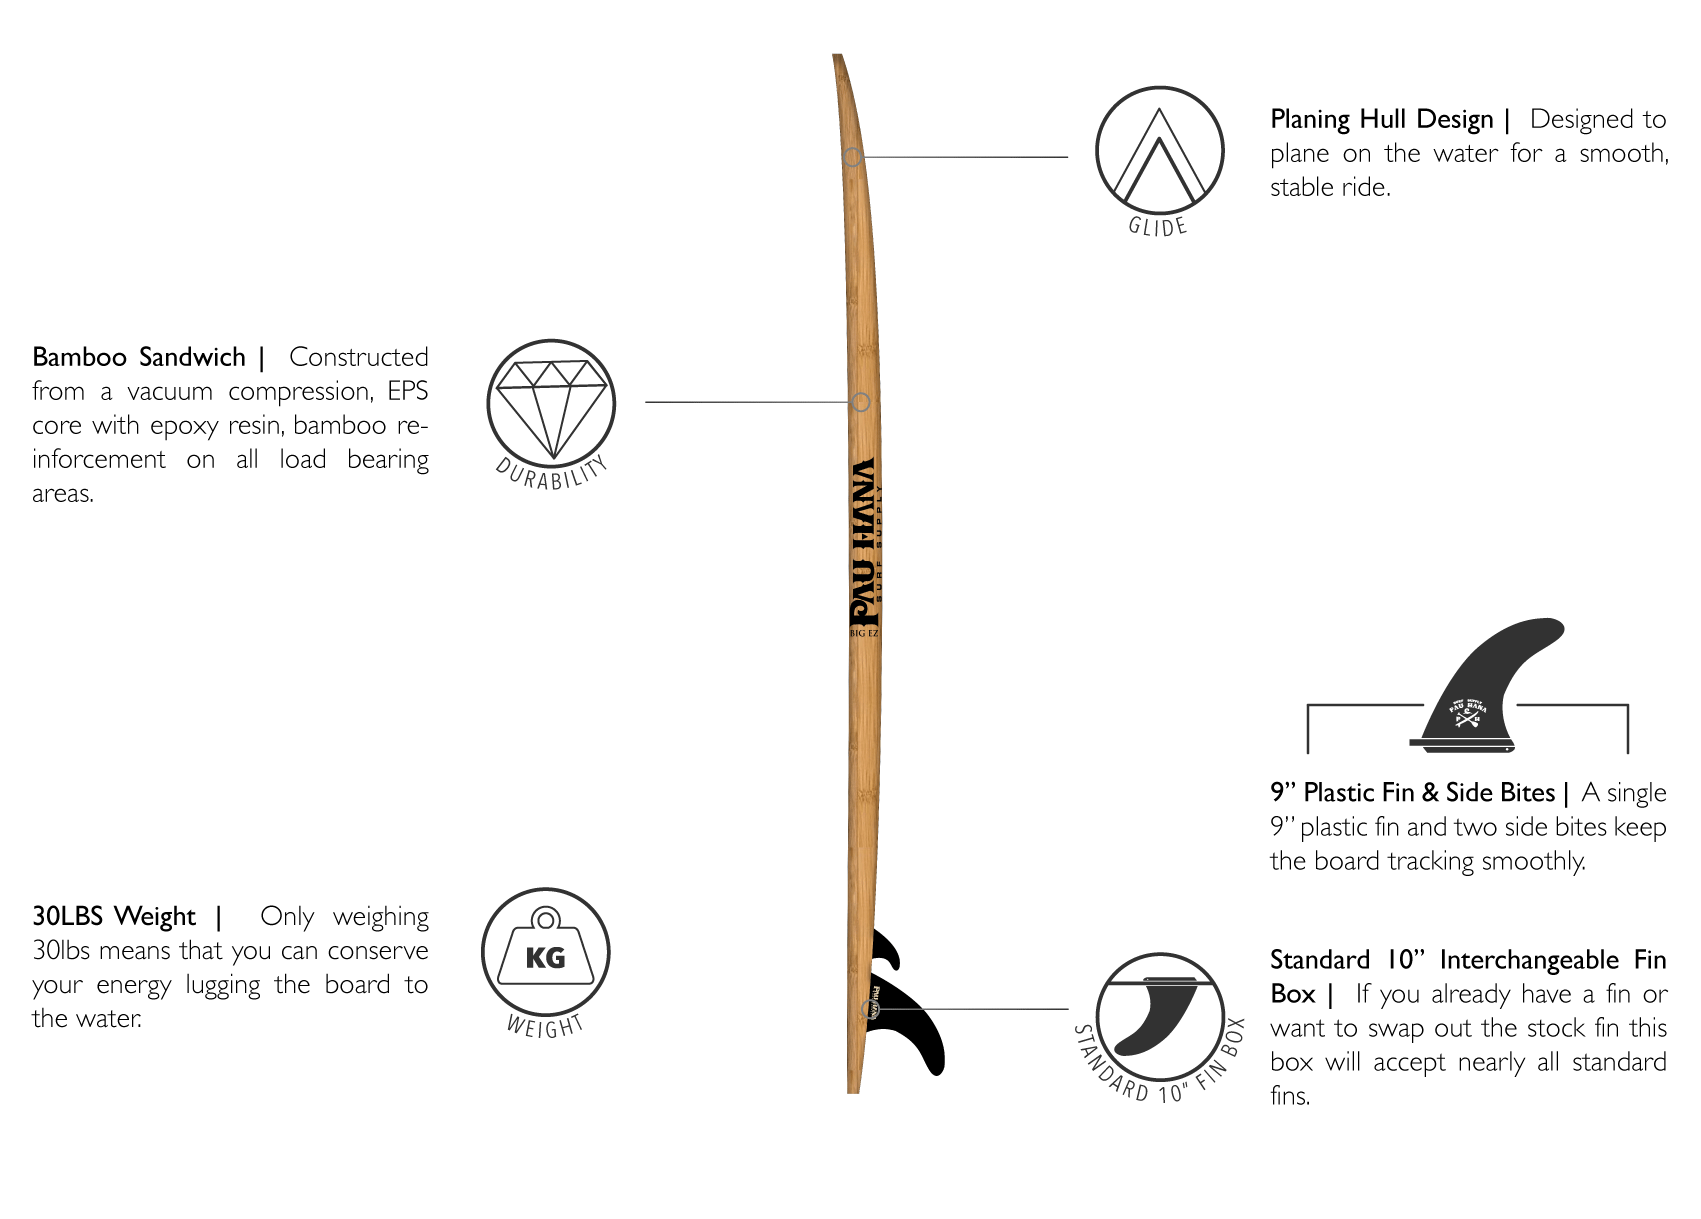 This is the best family paddle board. Bamboo sandwich constructed, 30 lbs in weight, planing hull design, 9 inch plastic fin and side bites, standard interchangeable fin box